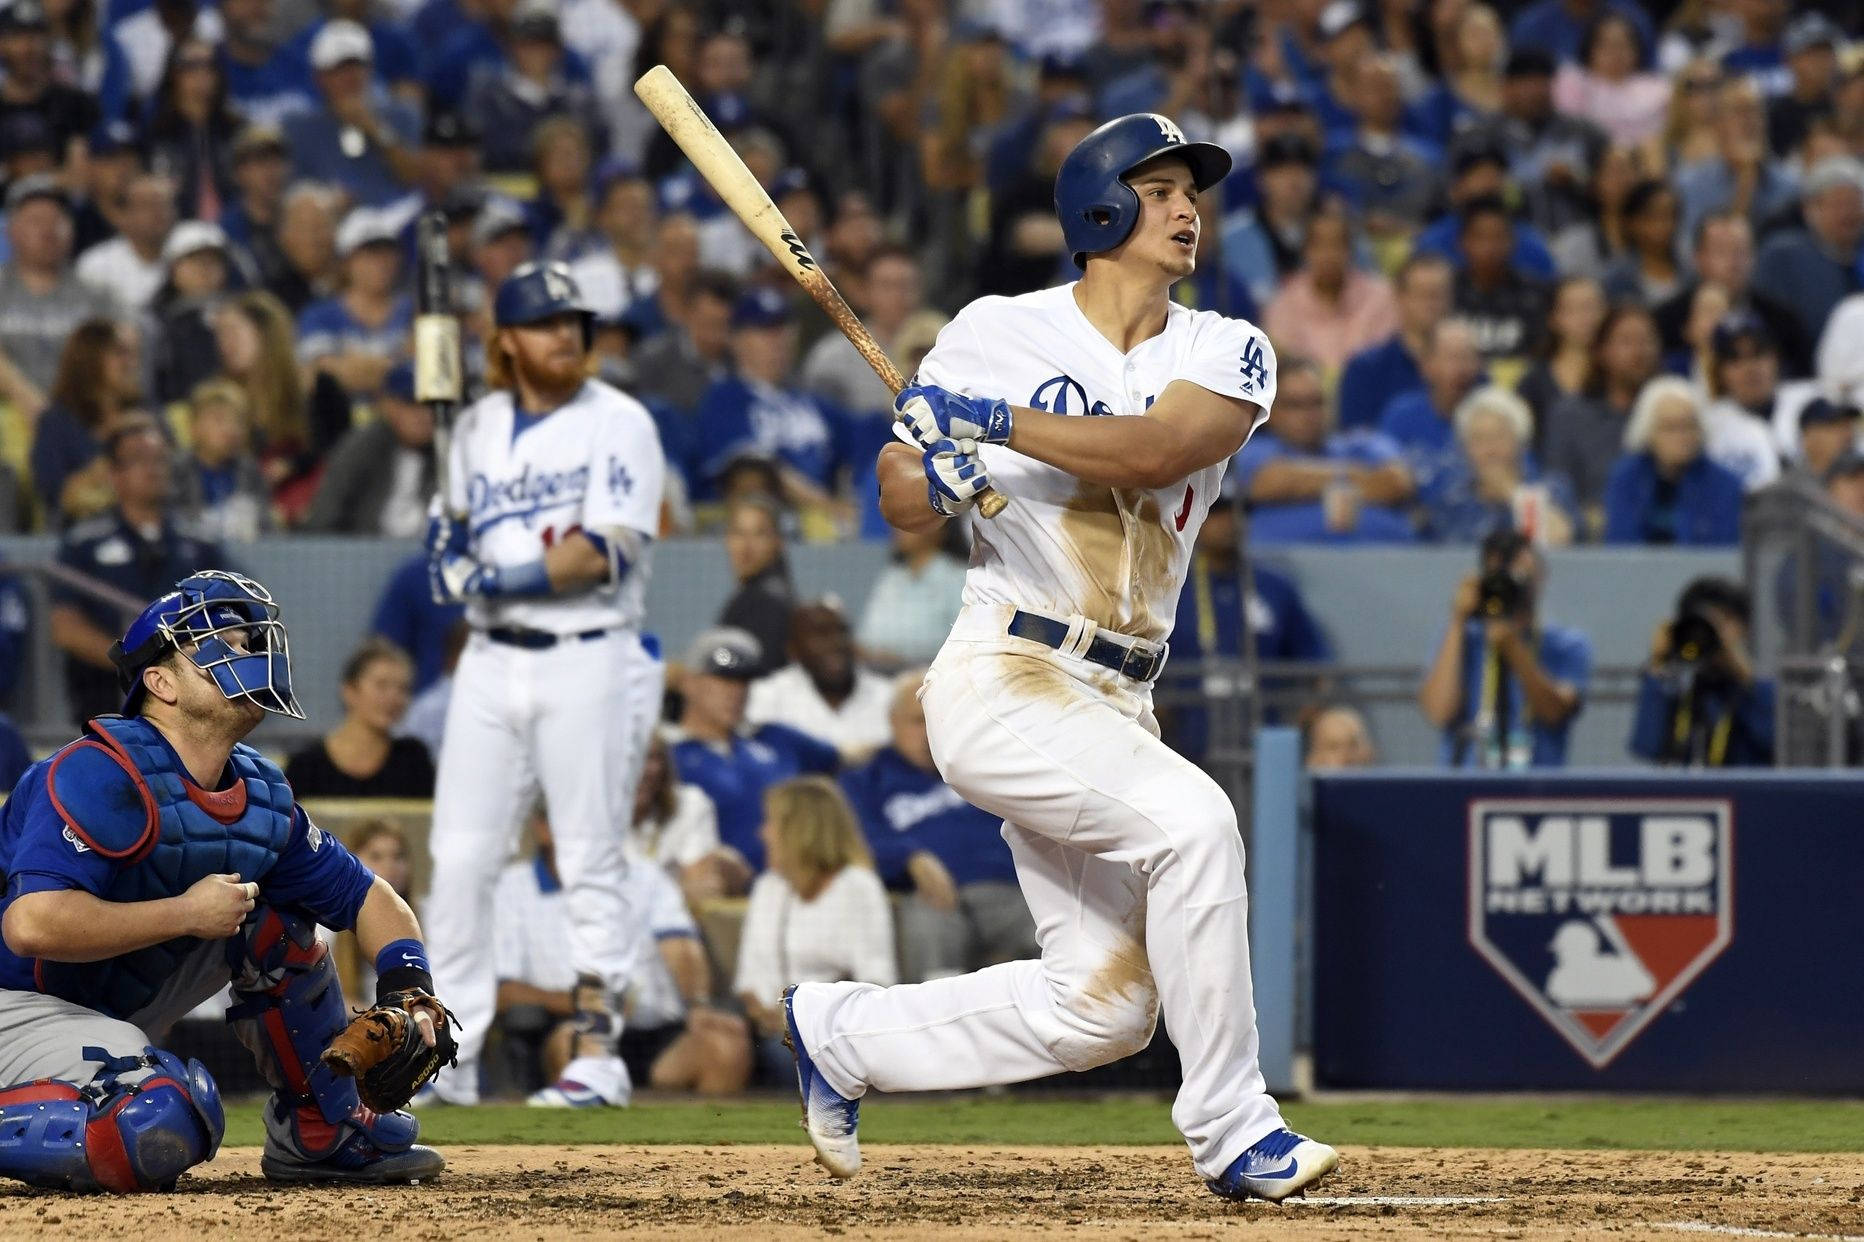 Corey Seager Looking Up While Holding Bat